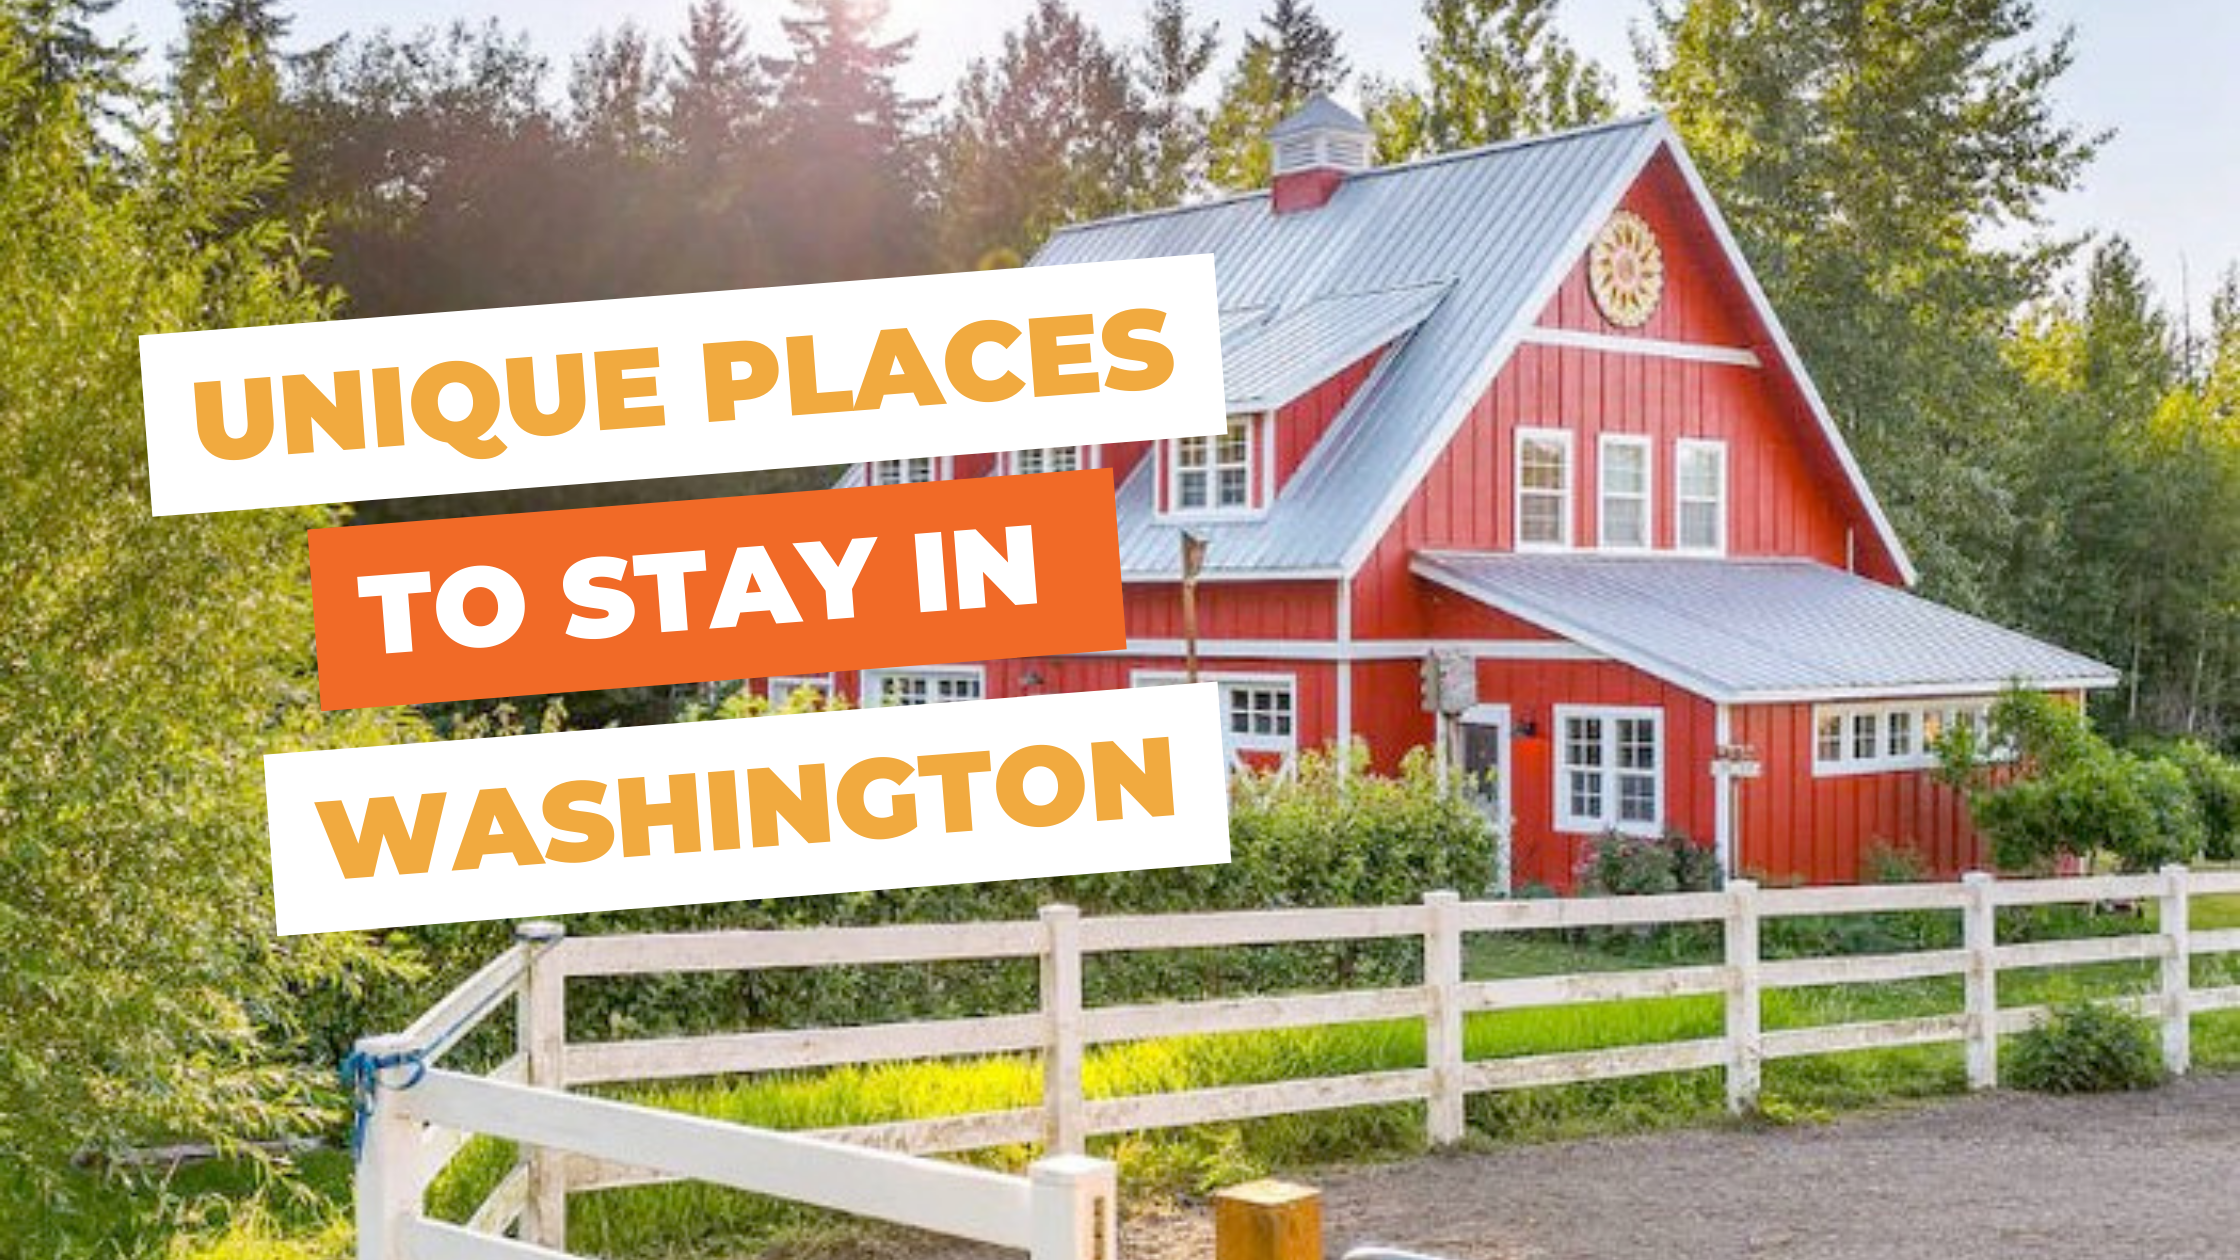 Unique Places to Stay in Washington: 10 Cool & Quirky Rentals